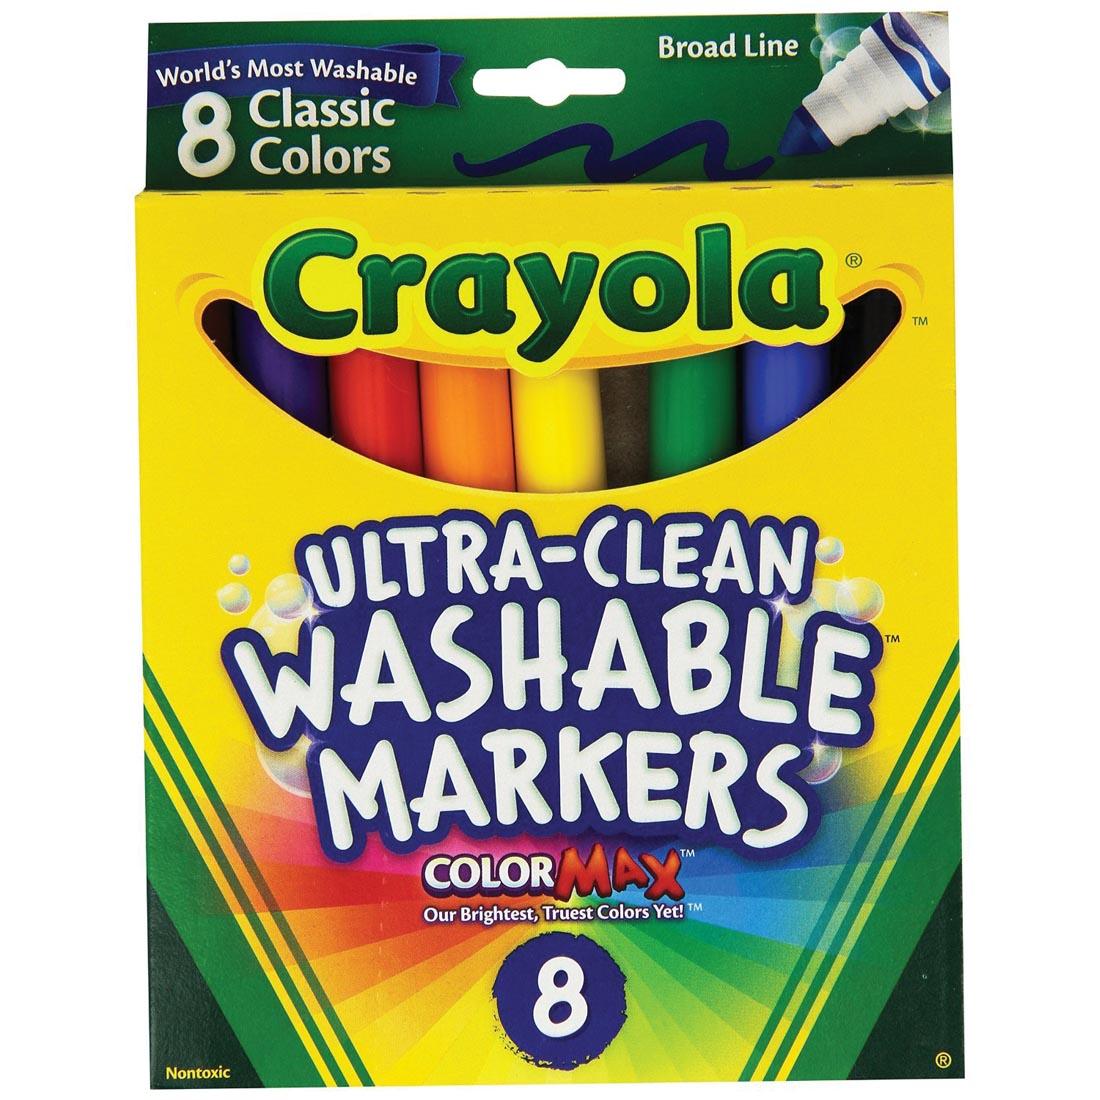 Crayola Ultra-Clean Washable Broad Line Markers 8-Color Set